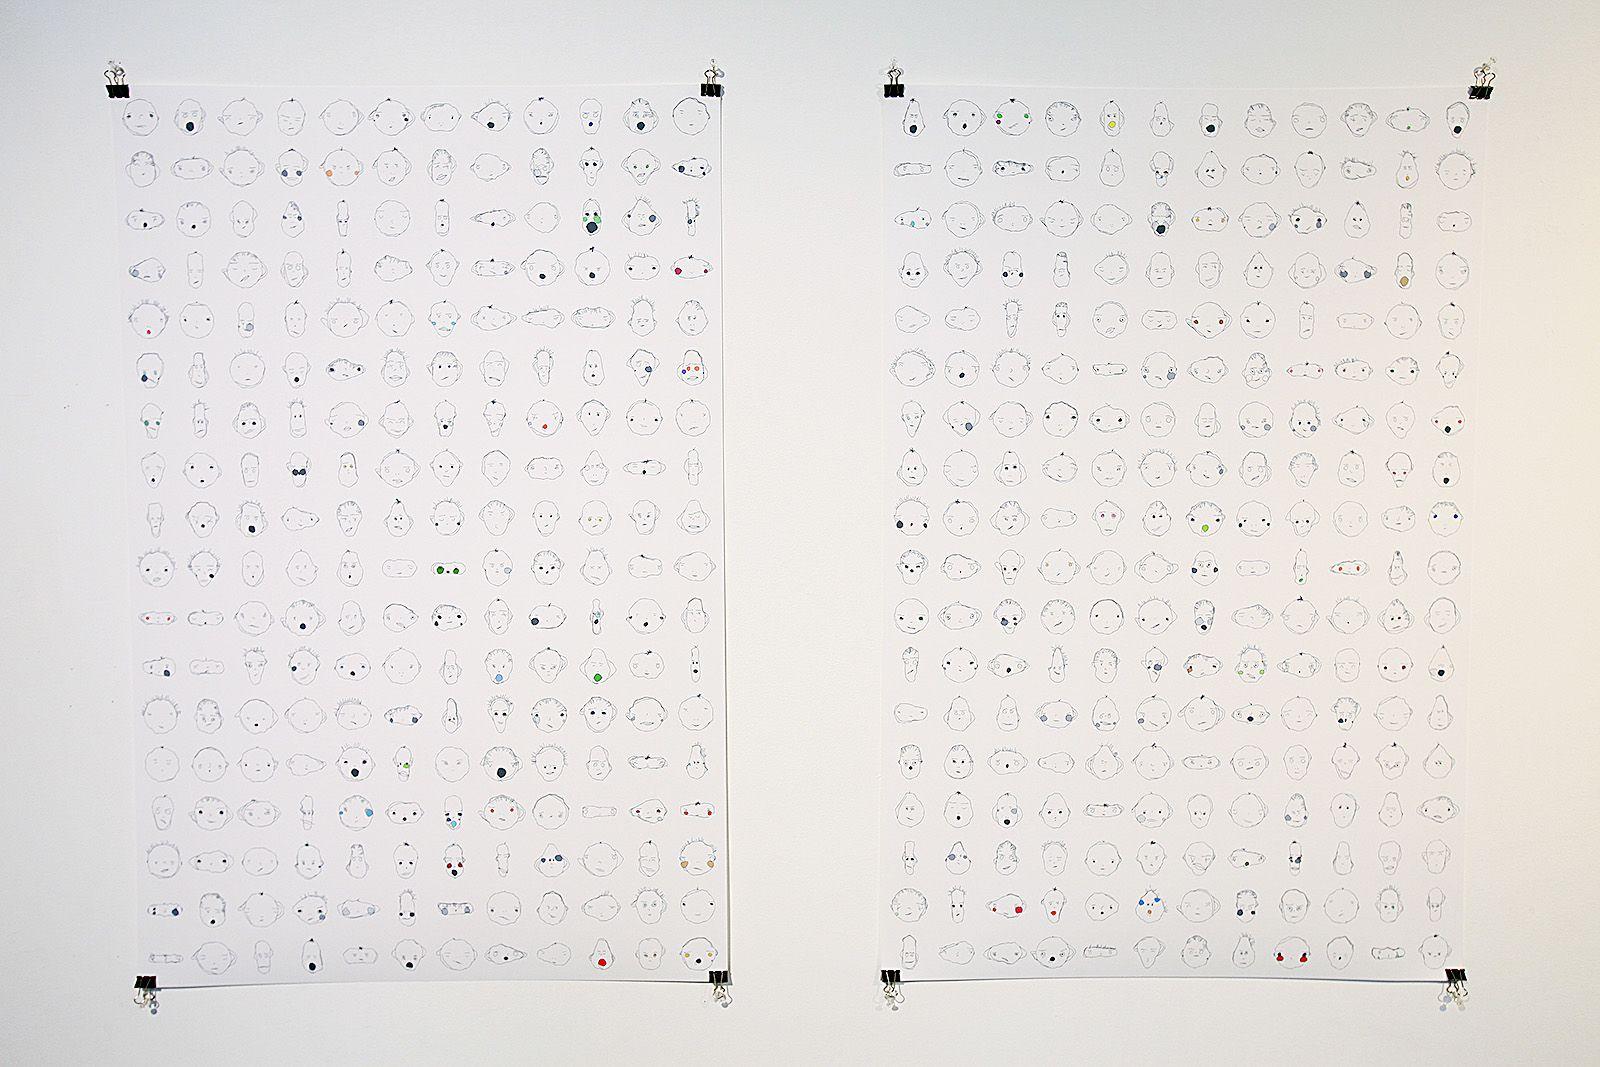 There are two prints of various equally spaced apart weird faces. All of them have two eyes, two eyebrows, and a mouth. Some have hair, a nose, ears, or blush. All have unique expressions and are line drawn in black. Almost none have color.